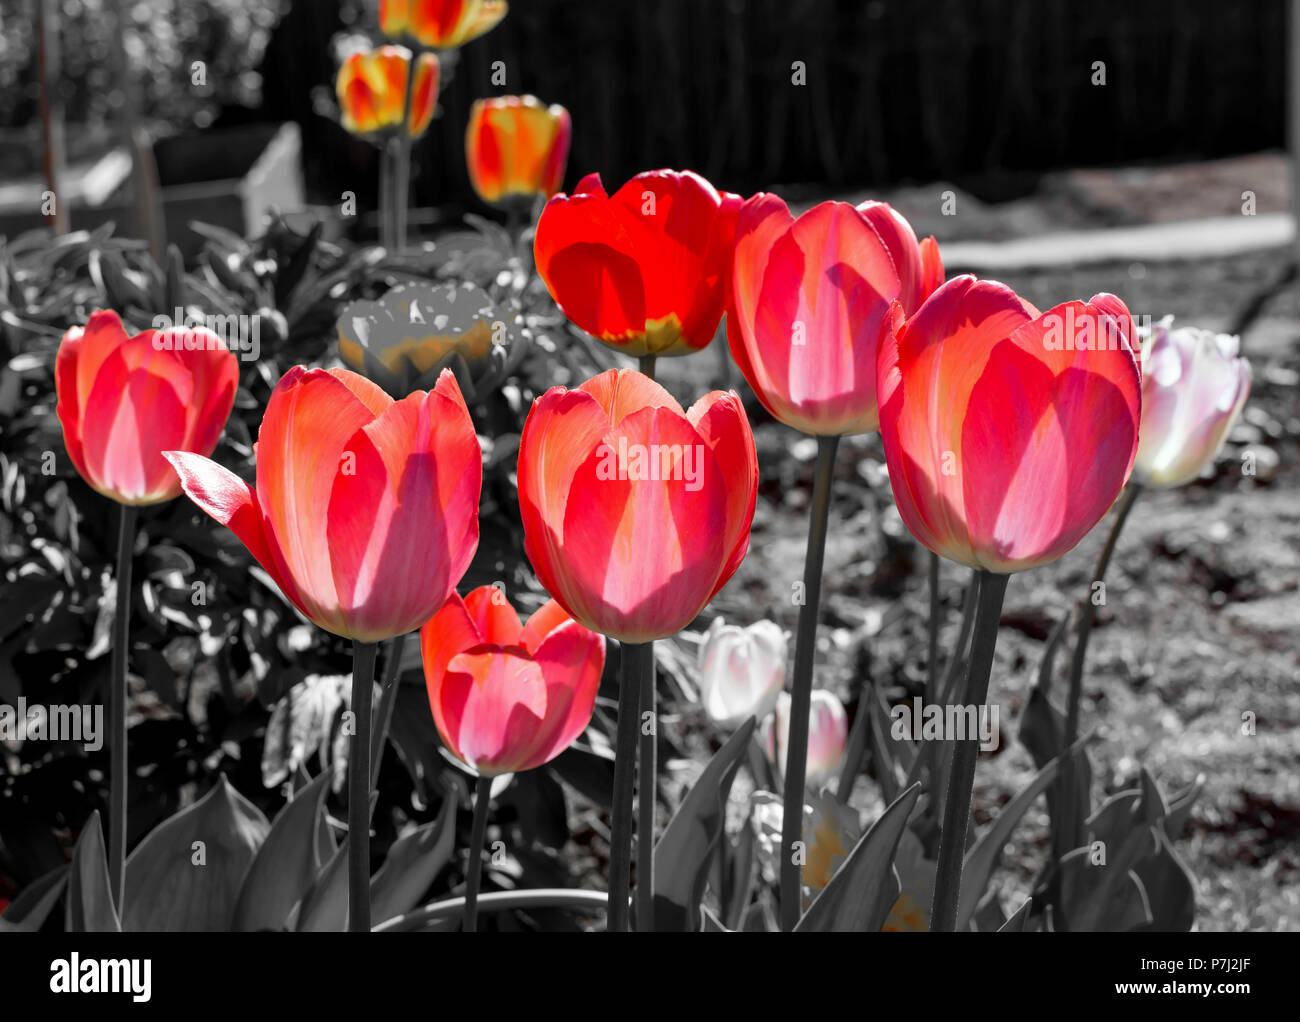 The classic Red Tulips on the black and white background. Darwin Hybrid Oxford Tulips against black and white background. Red tulips look transparent  Stock Photo